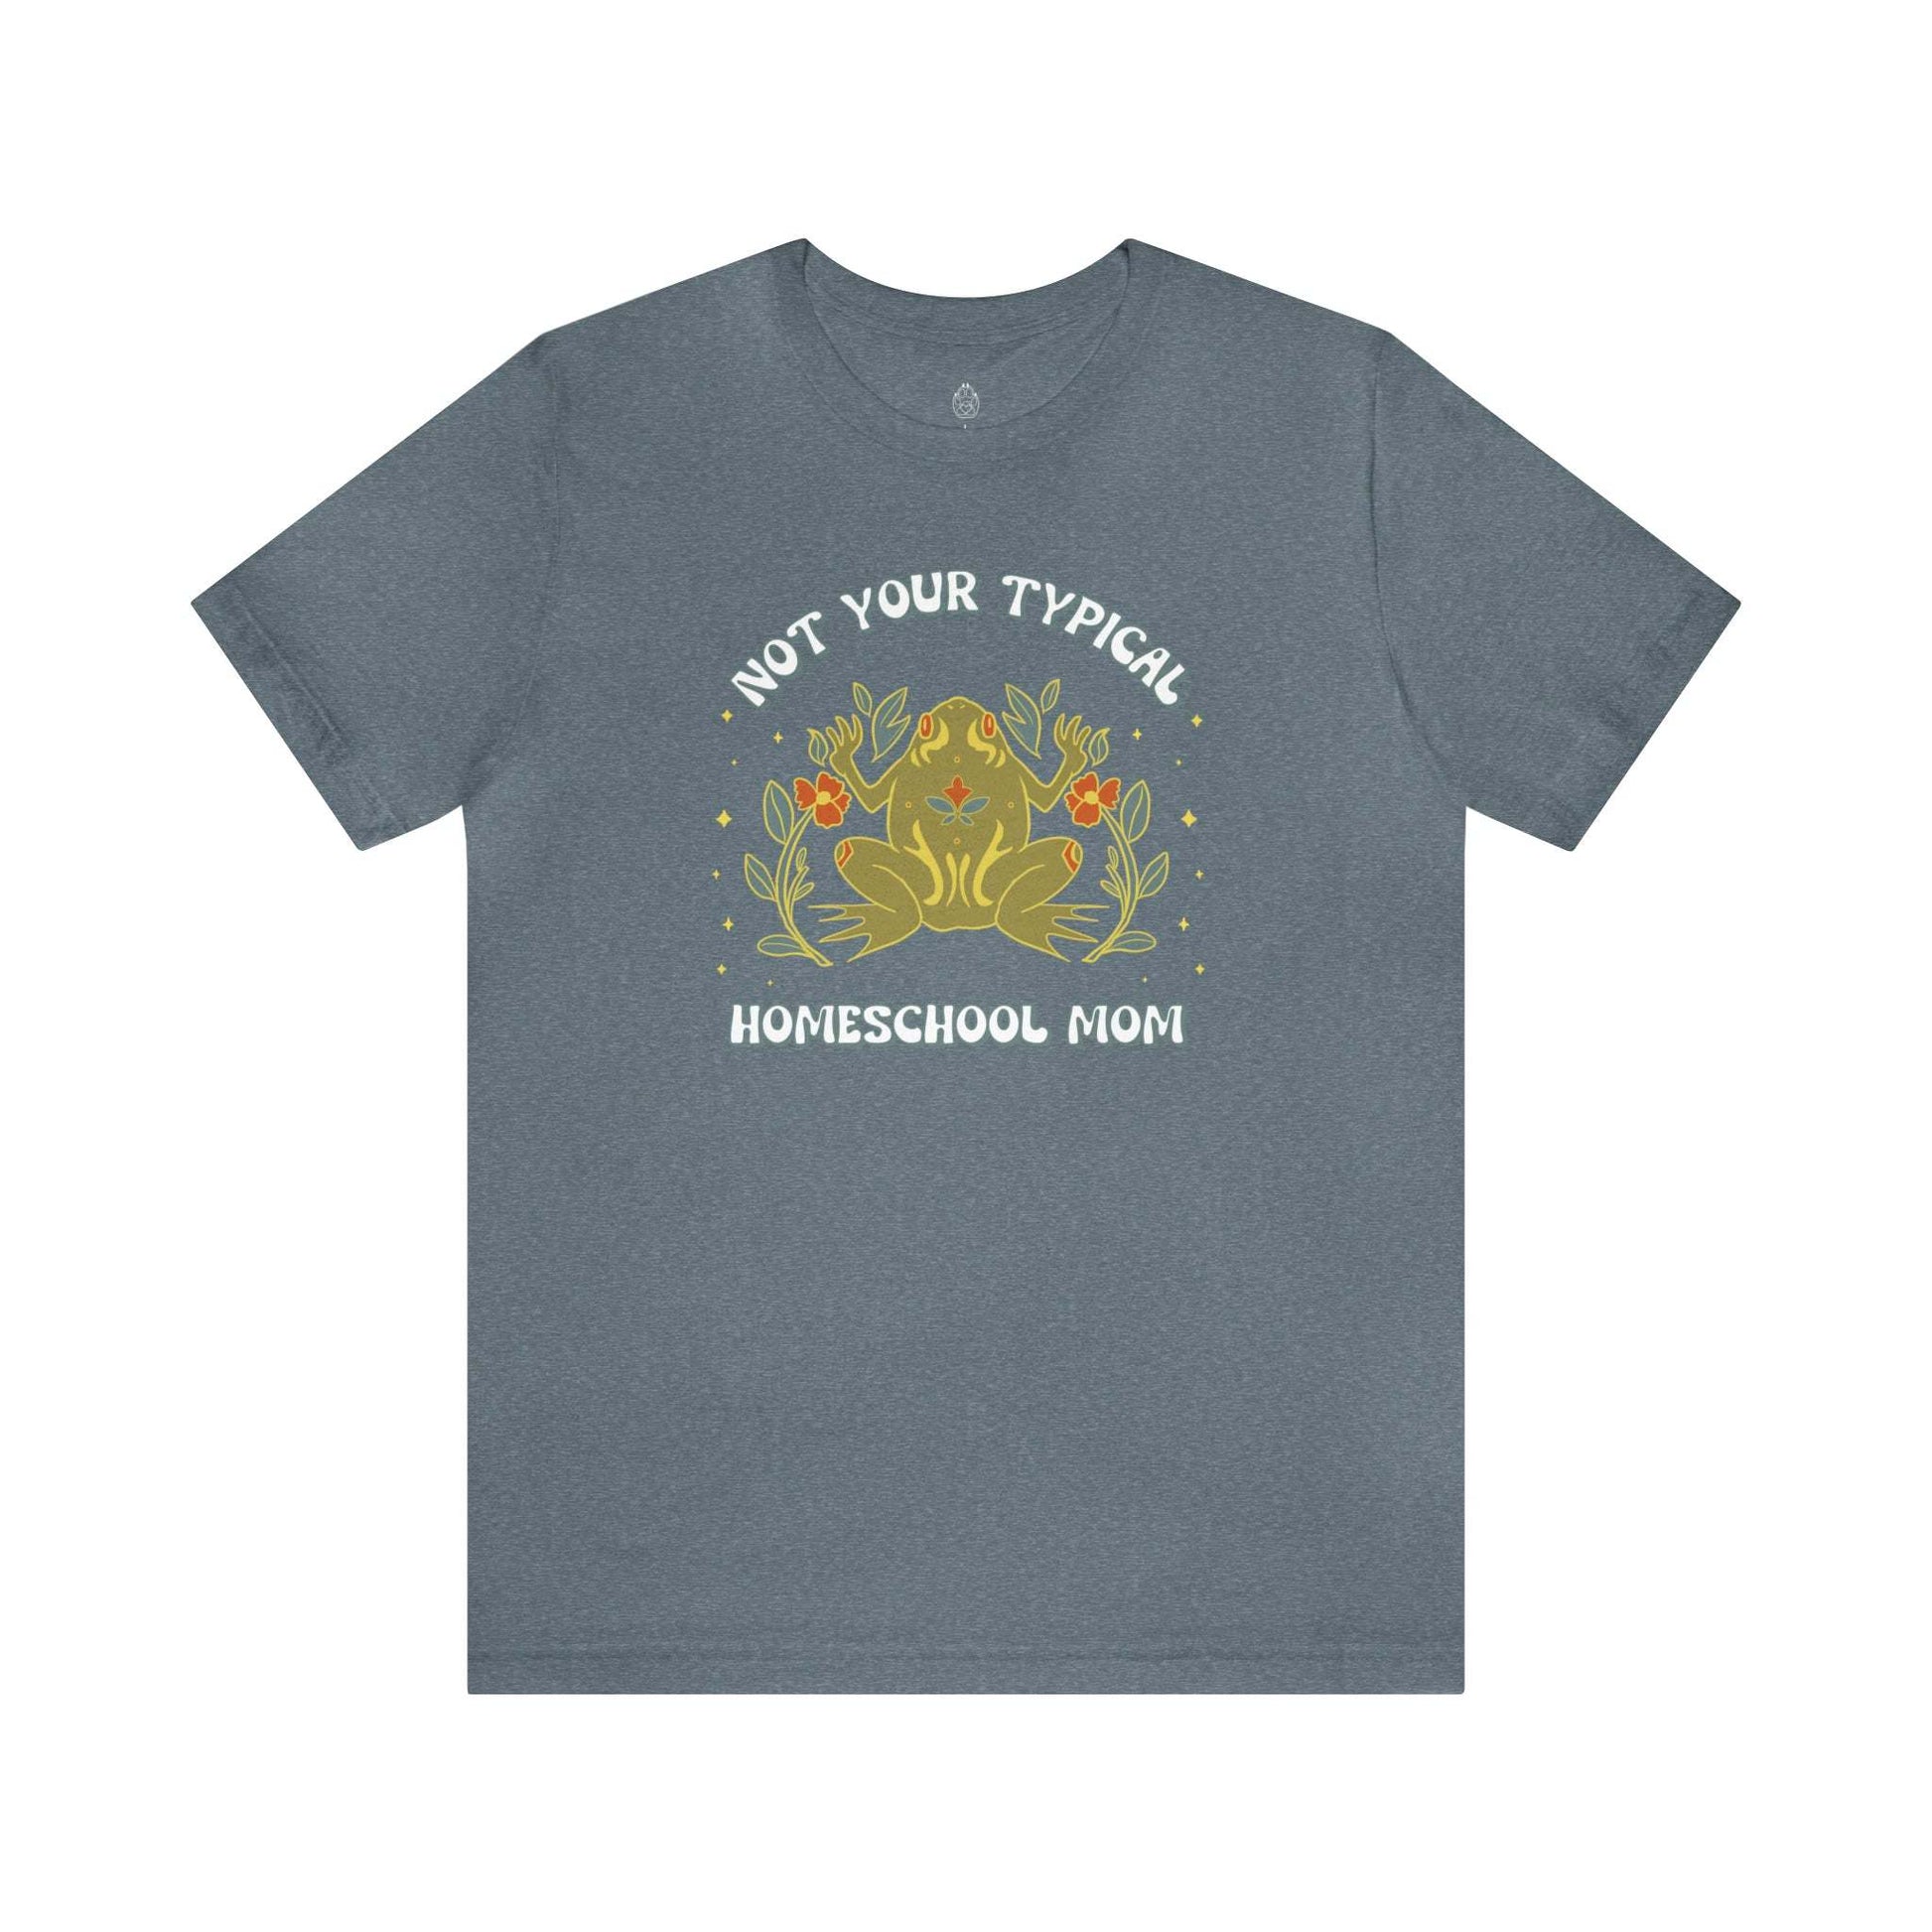 Typical Homeschool Mom Short Sleeve Tee ShirtWolfe Paw DesignsTypical Homeschool Mom Short Sleeve Tee ShirtHow boring it would be if we were all the same.
Match your little!
Check out our kids tee: Not Your Typical Homeschooler 
100% Airlume combed and ringspun cotton (fiNot Your Typical Homeschool Mom Short Sleeve Tee Shirt